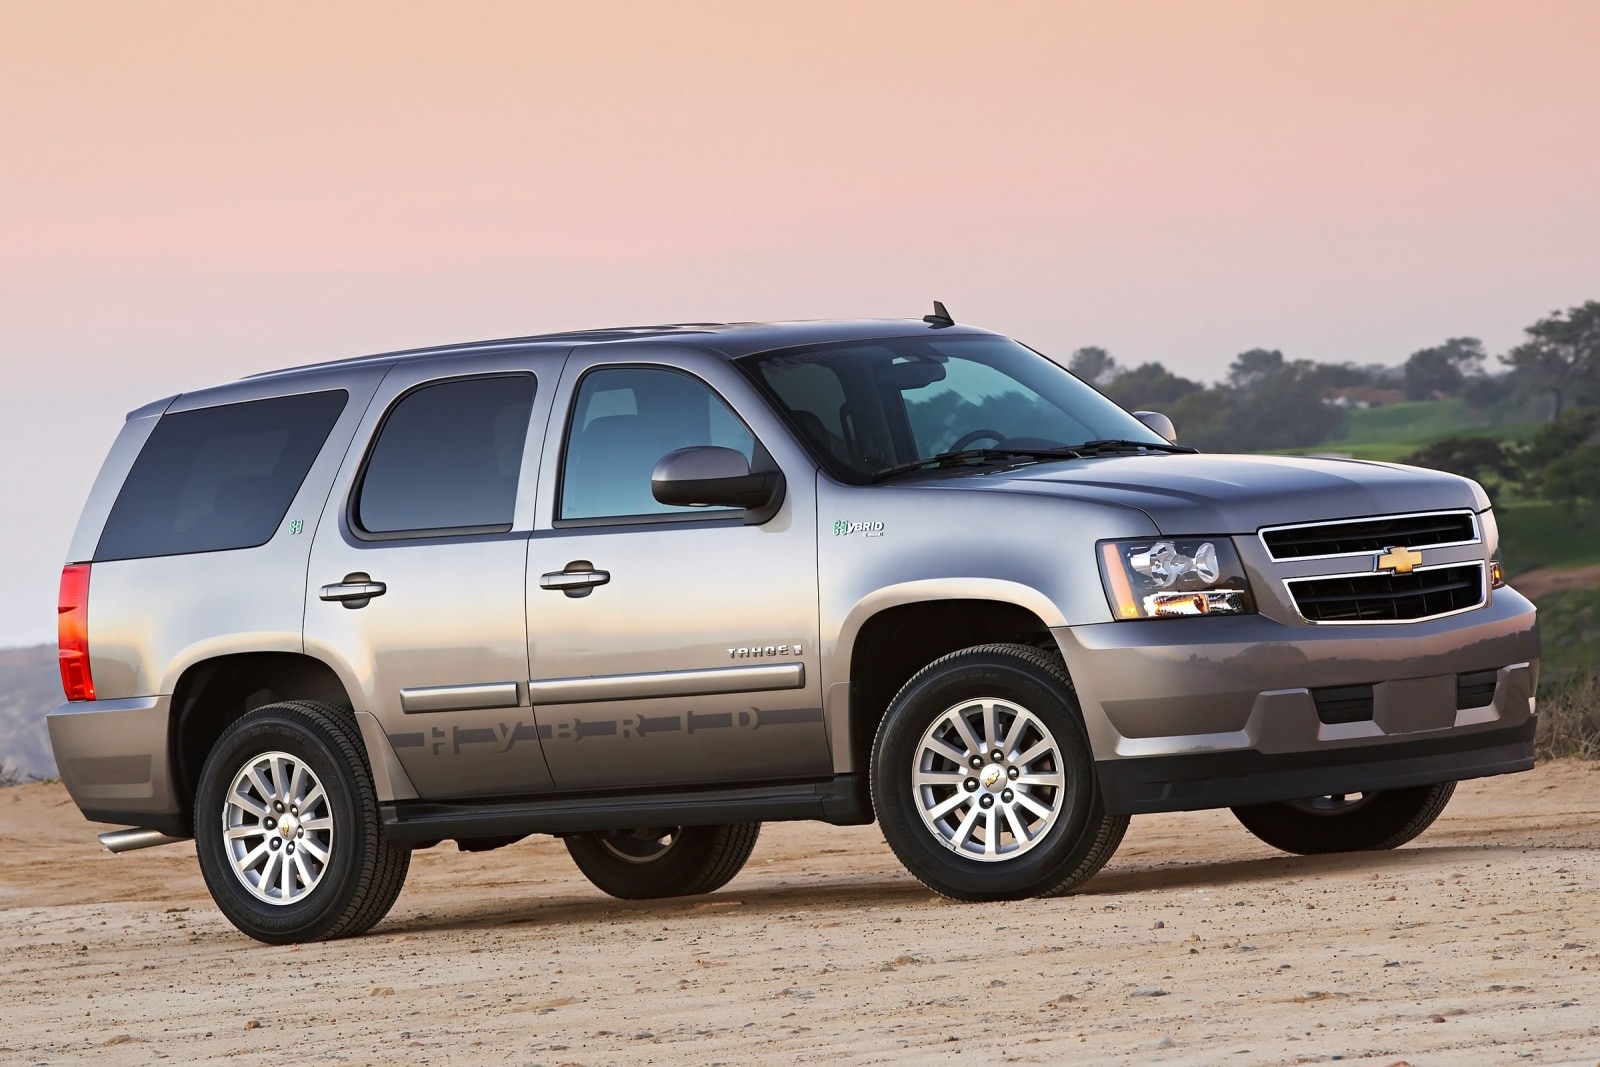 2013 Chevy Tahoe Hybrid Review & Ratings | Edmunds